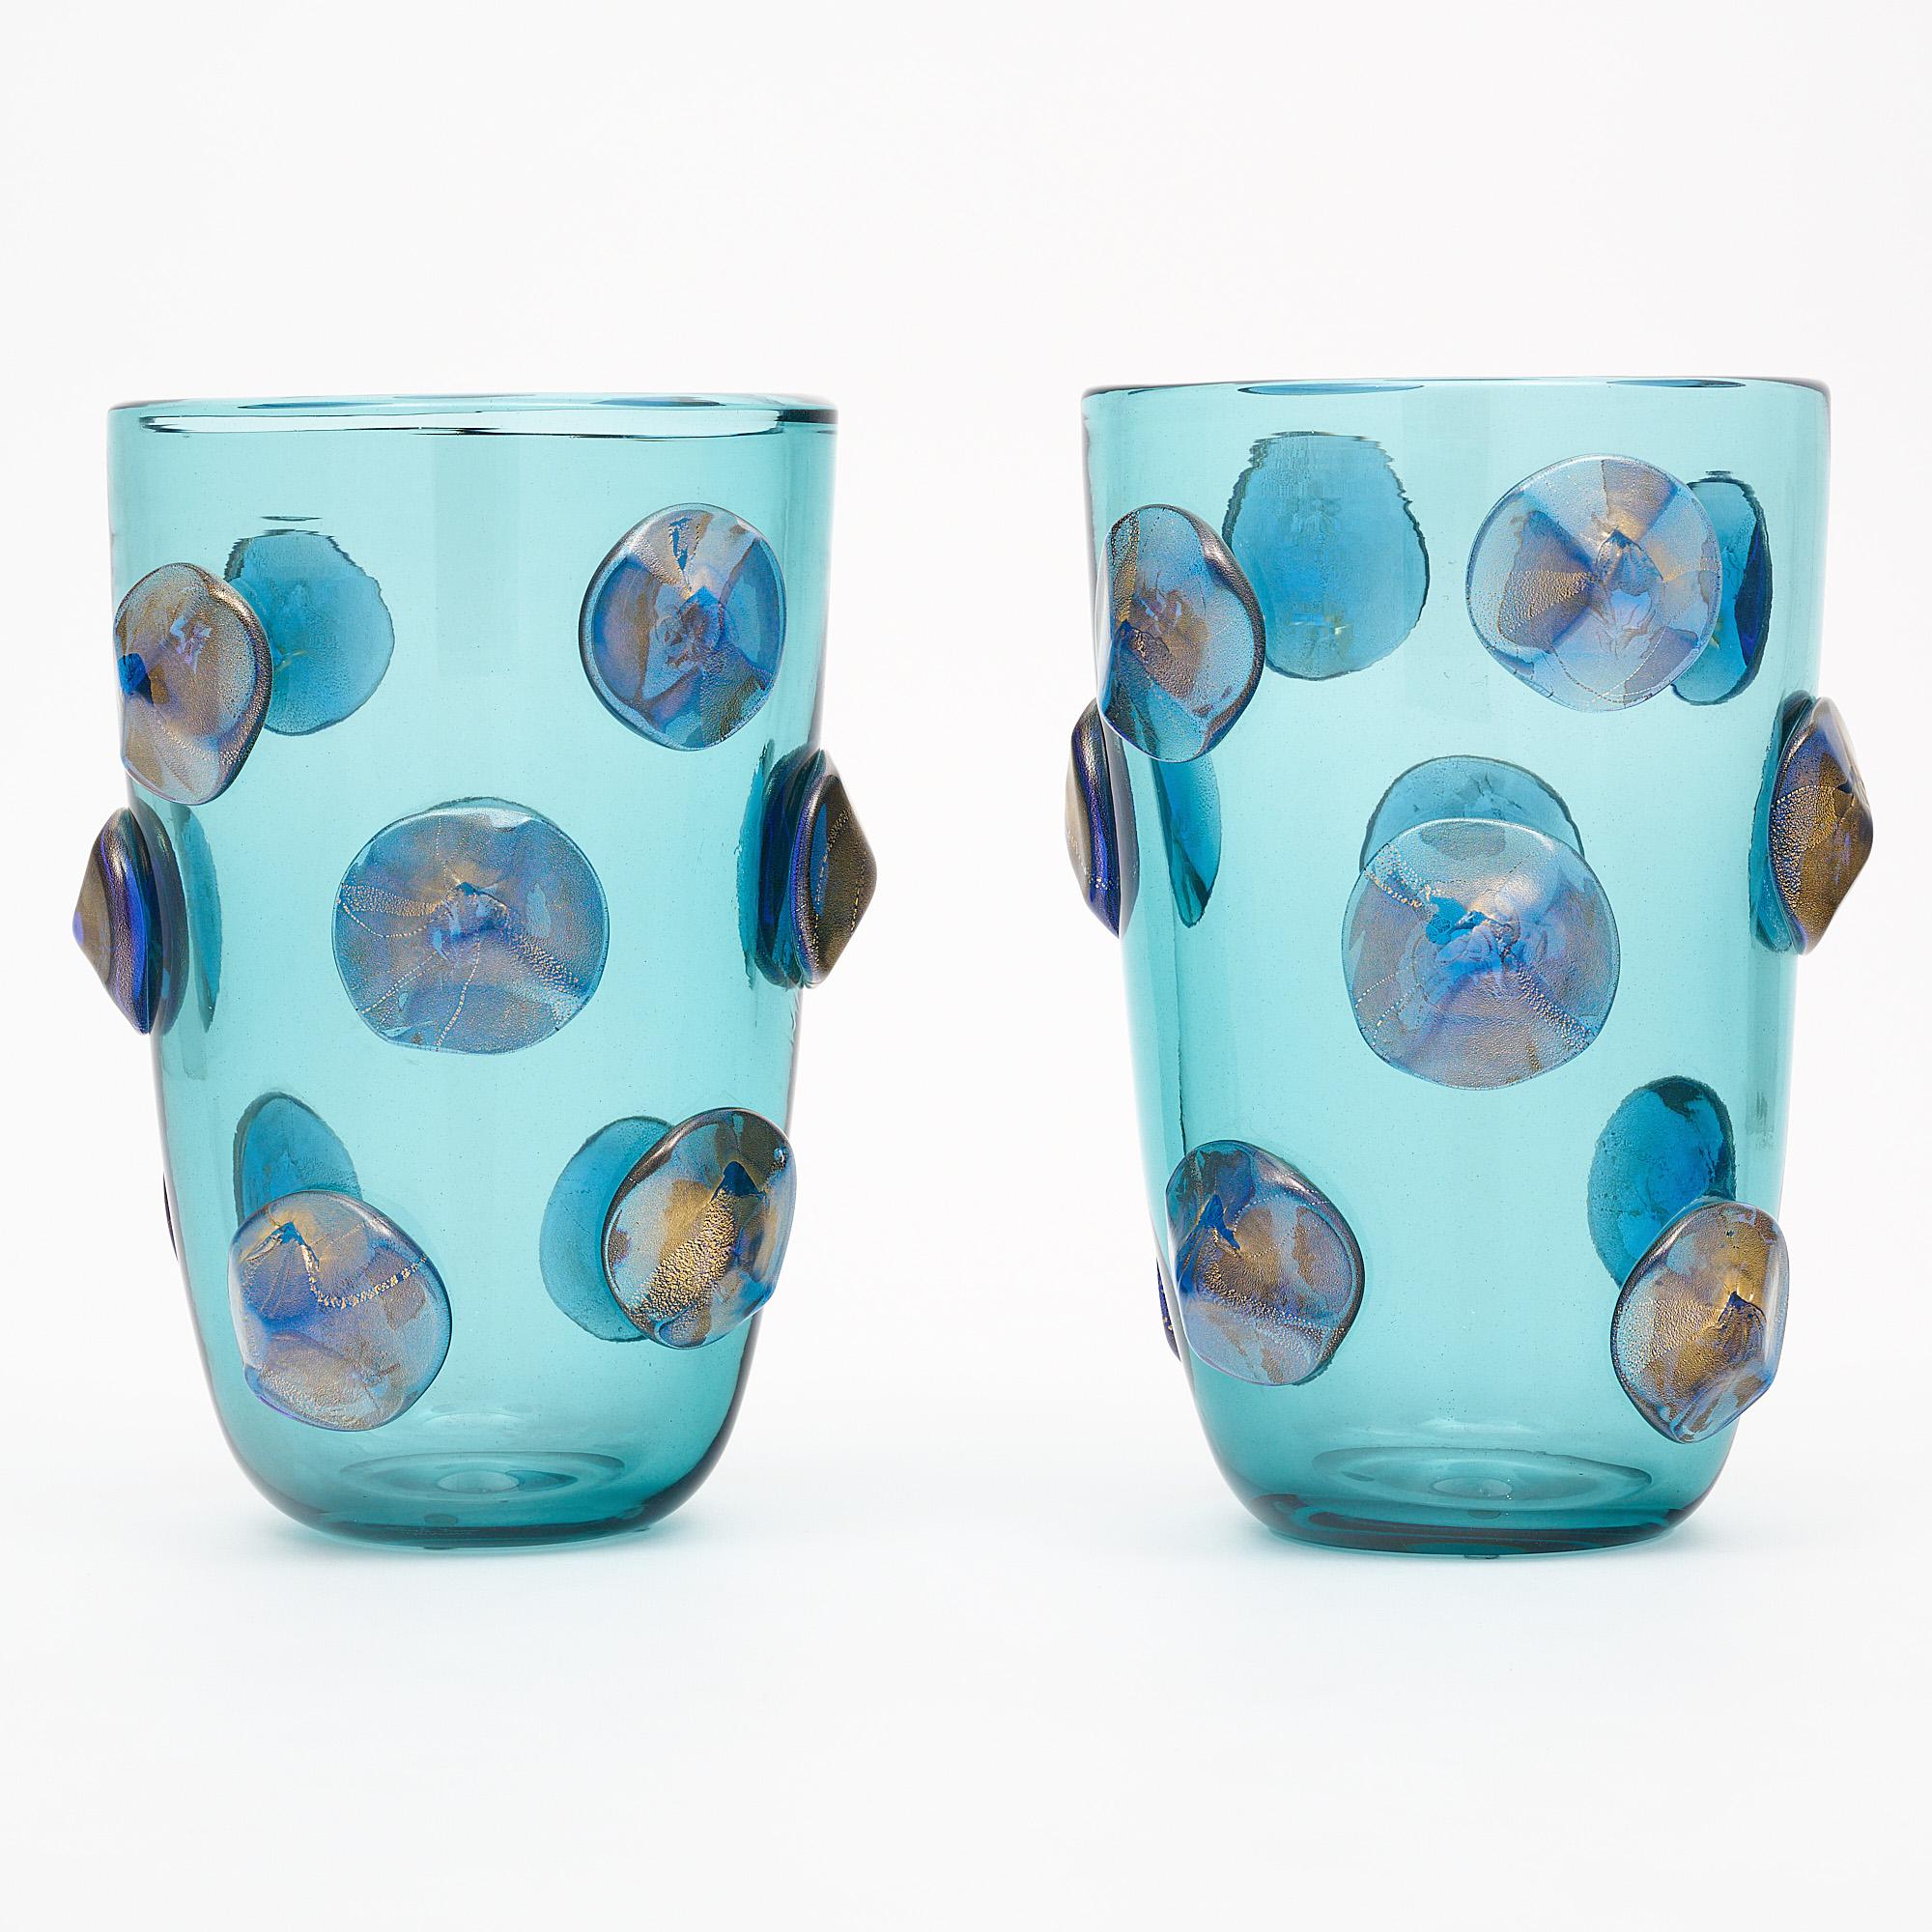 Murano glass medallion vases made of blue glass with 23 carat gold leaf flecks in the cobalt blue glass that makes up the medallions. We love this hand-blown and crafted pair. They are signed by Murano maestro Alberto Dona.